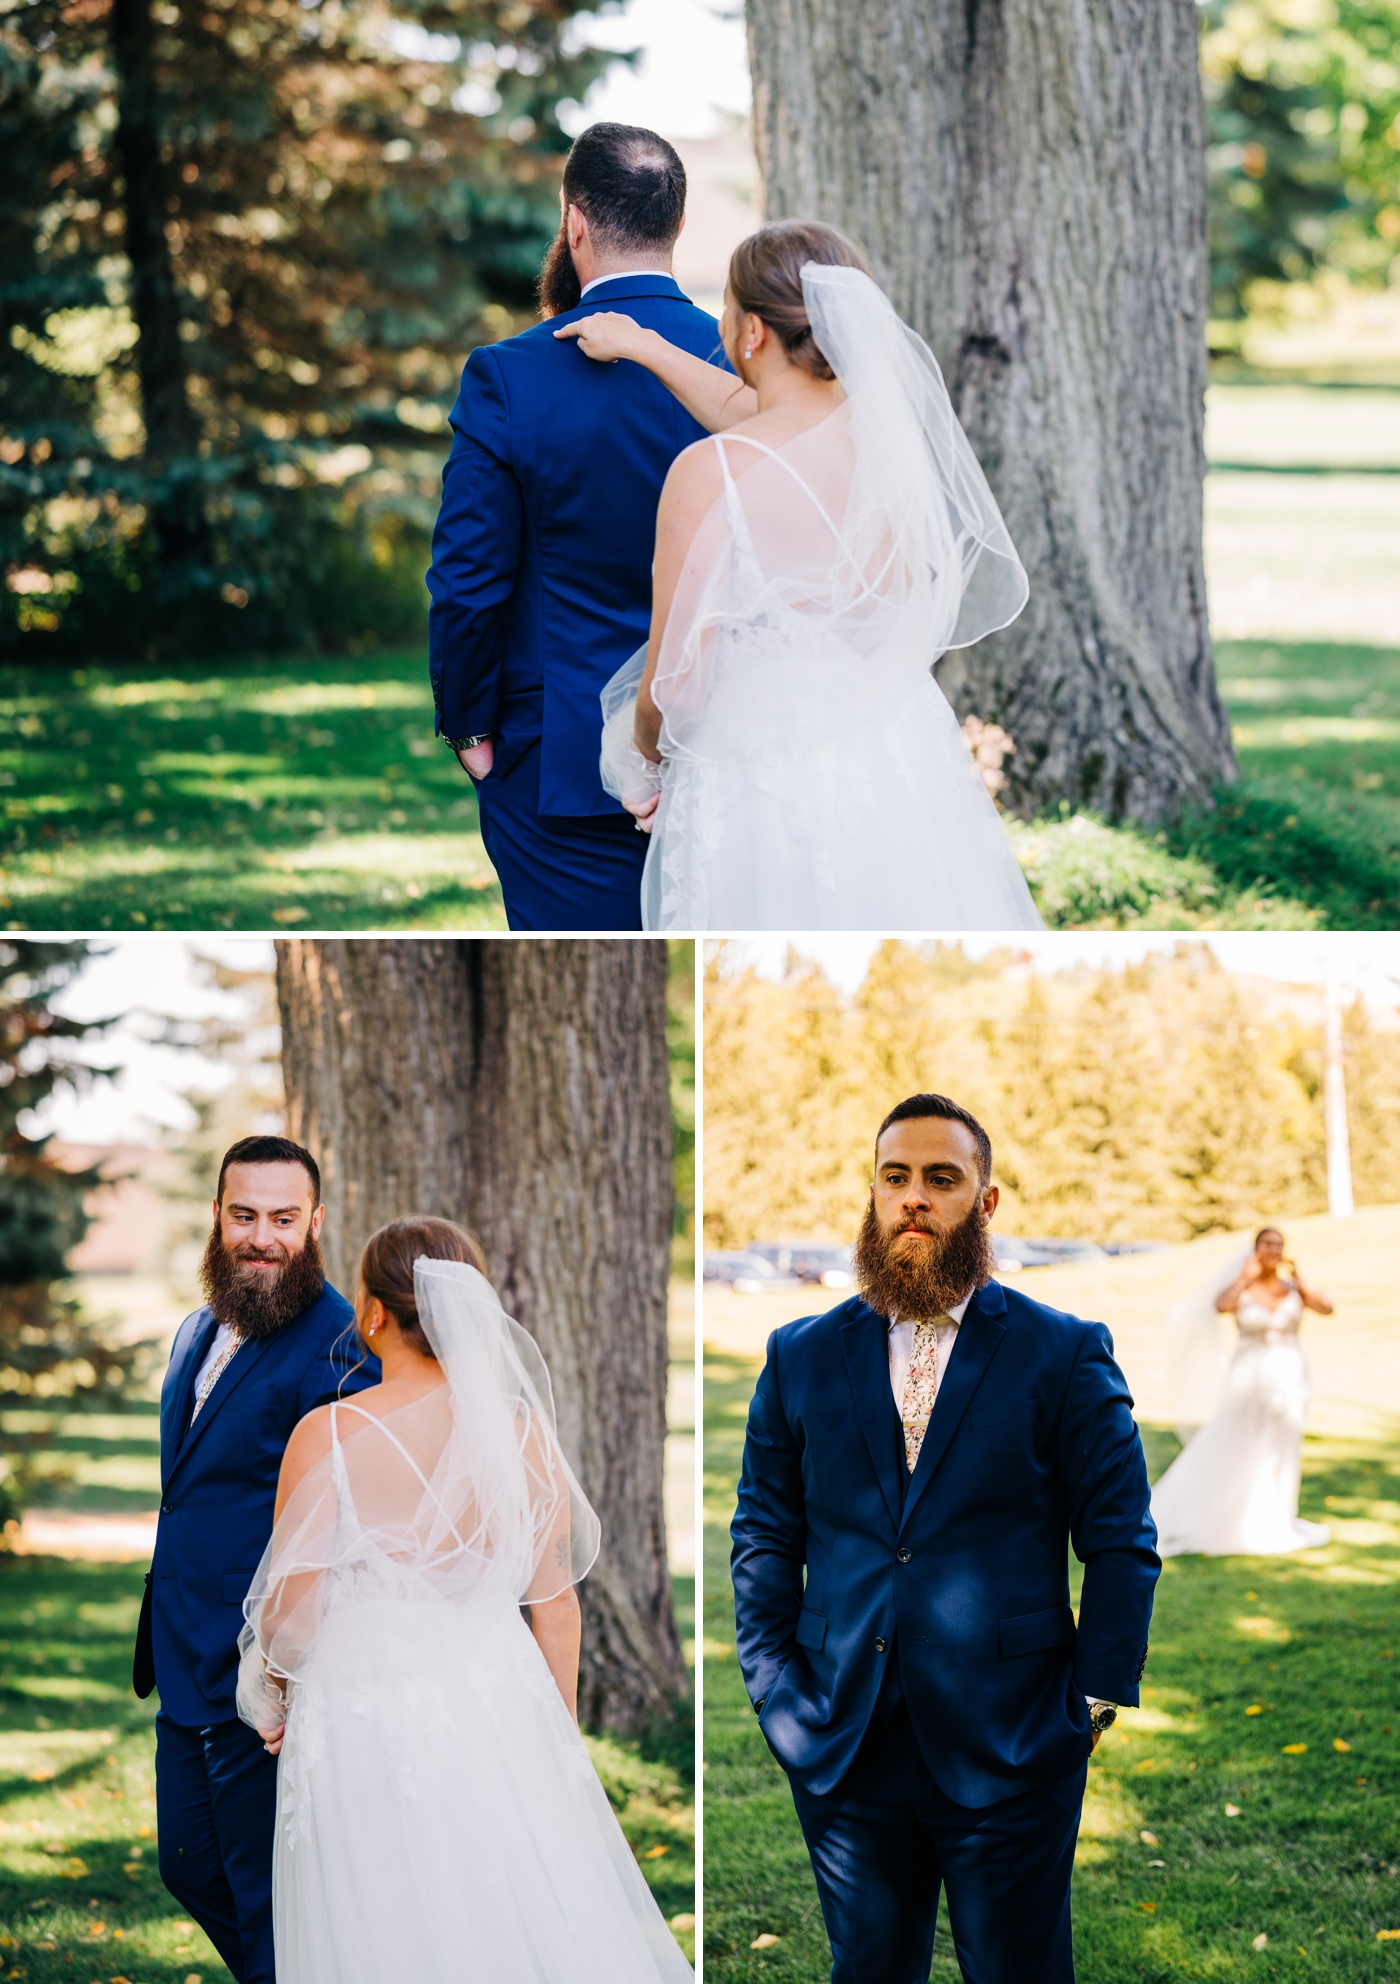 Bride and groom first look photos at Pine Knob Carriage House